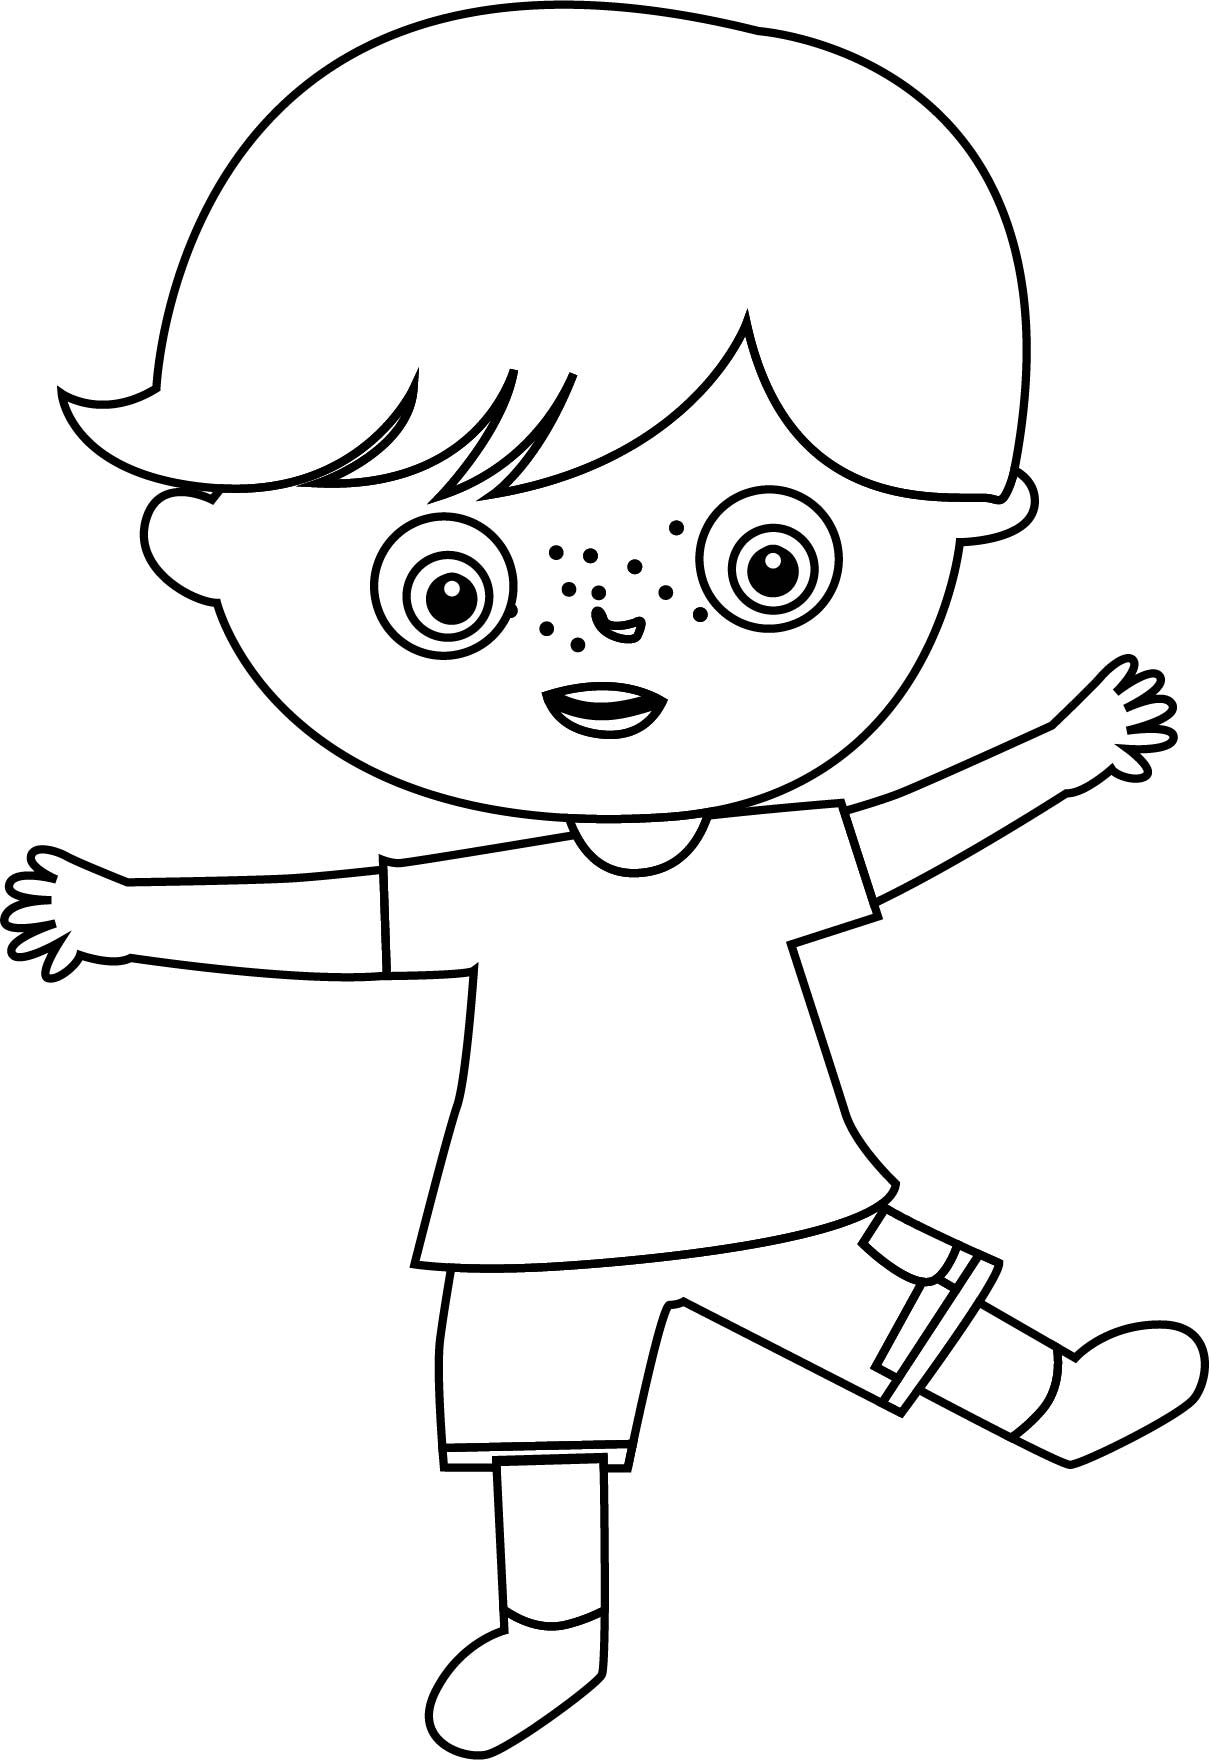 colouring page of a boy boy coloring pages coloring pages to print of page a boy colouring 